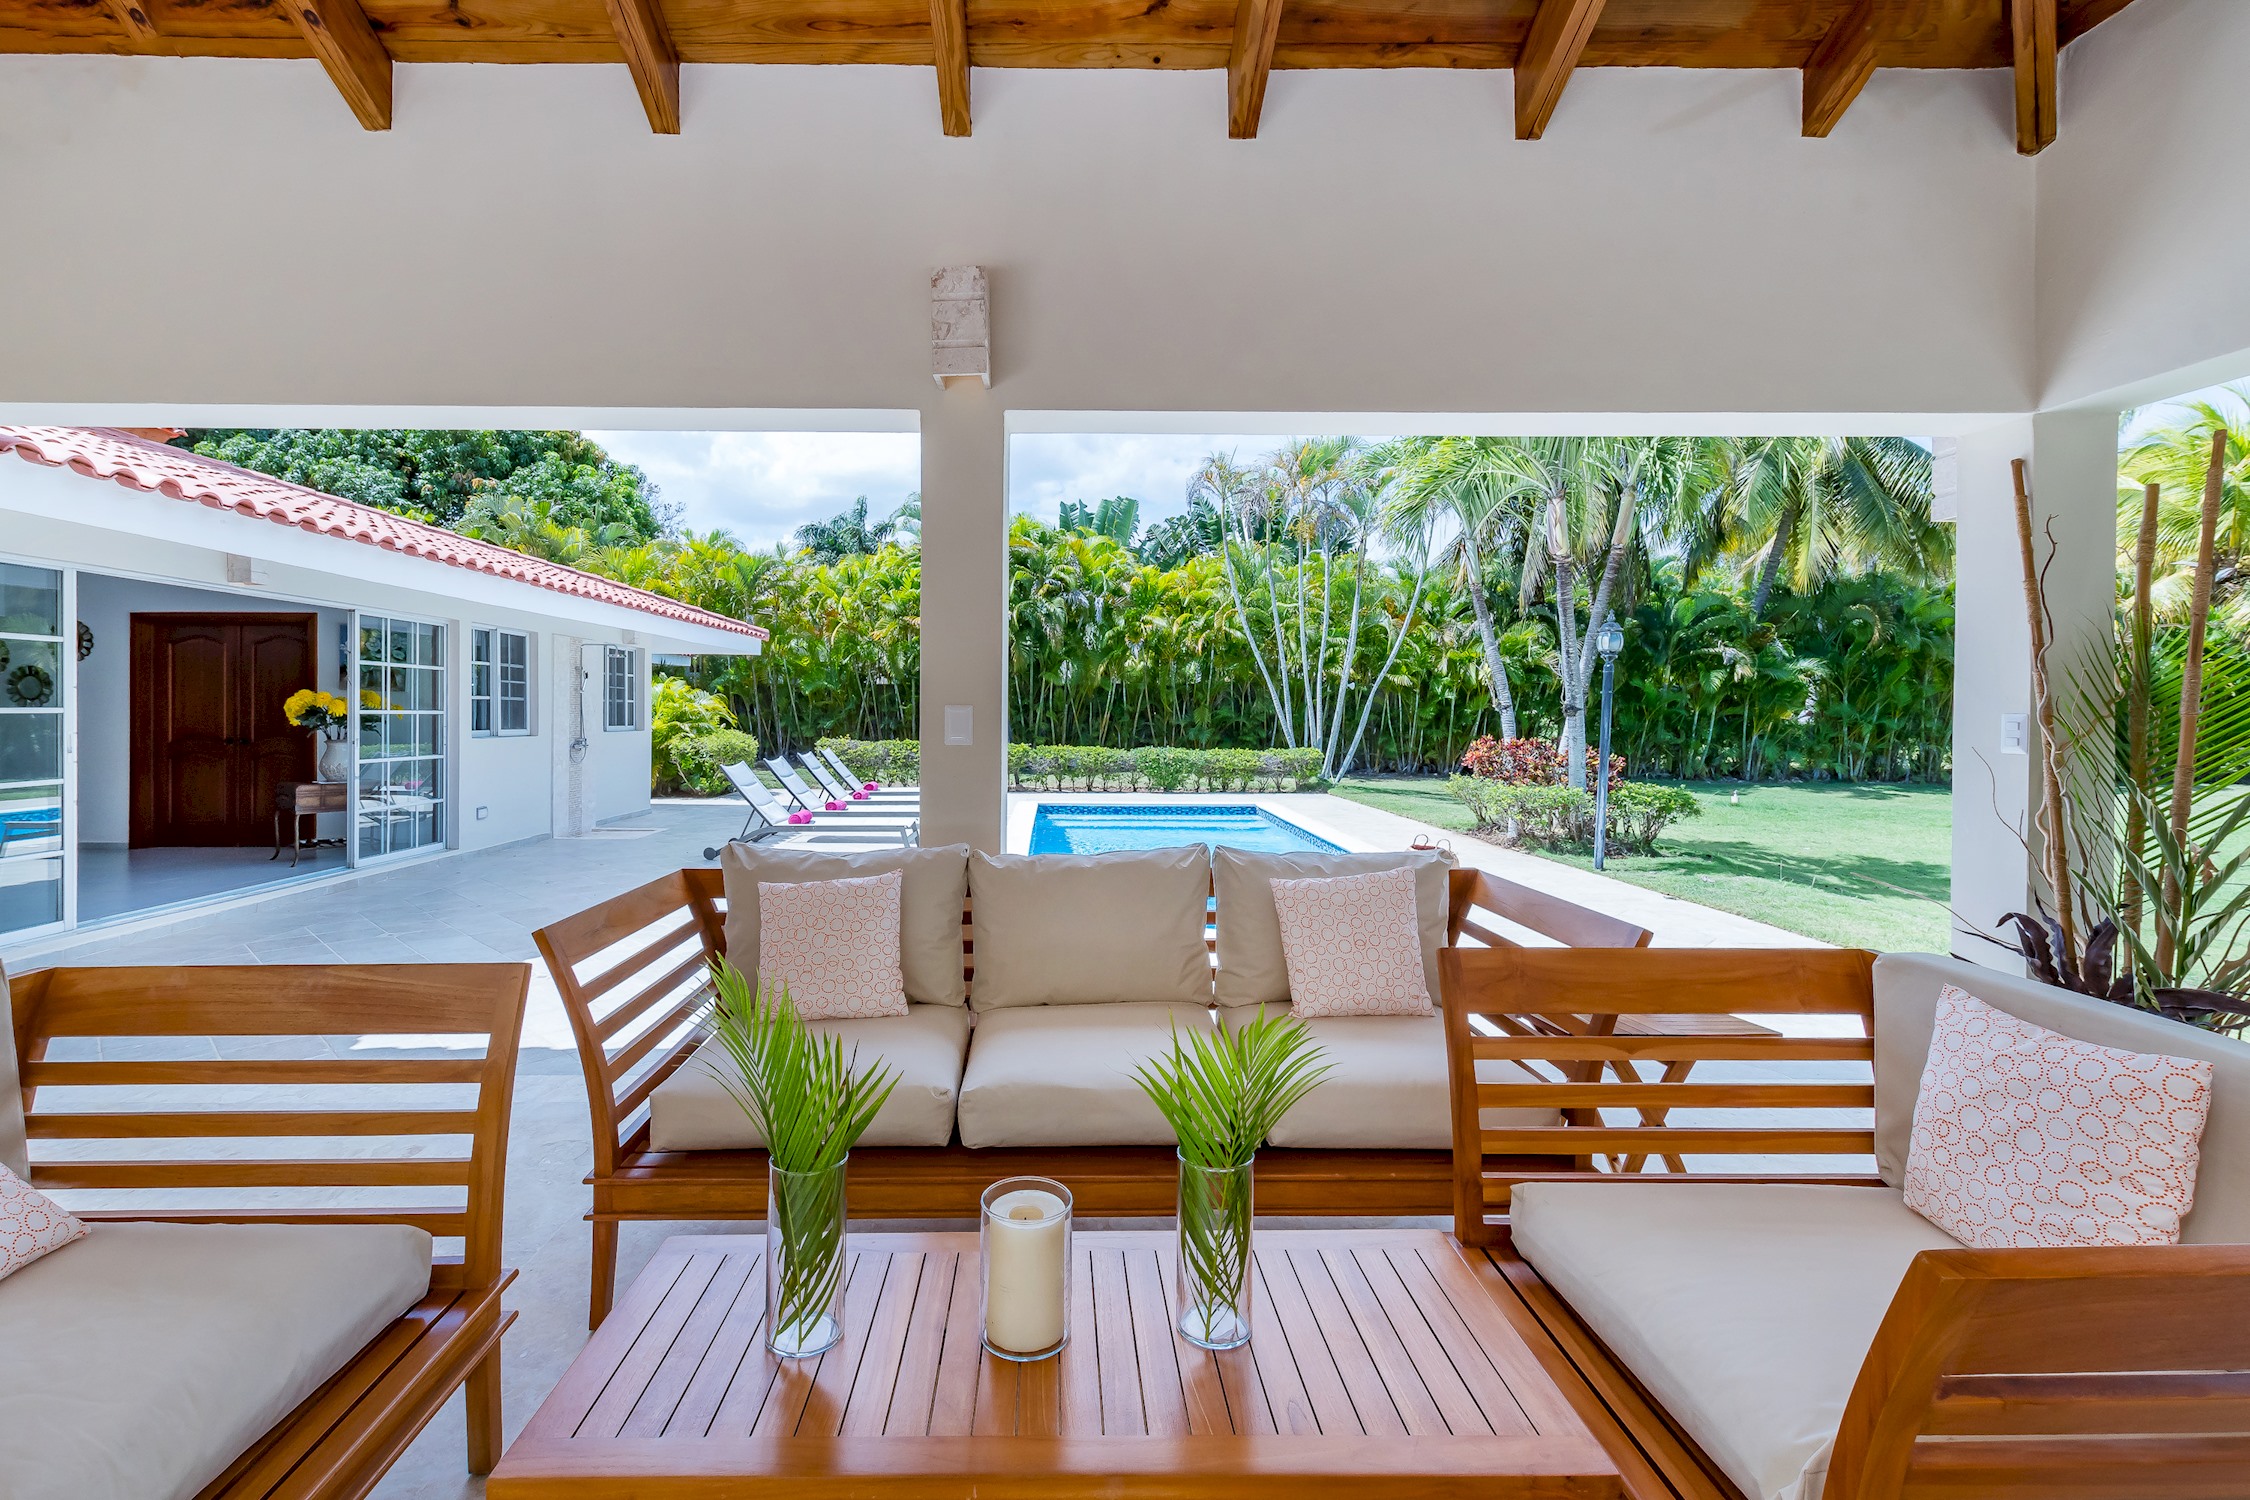 Casa de Campo villa for rent in Caribbean style - pool, jacuzzi, volleyball net 1